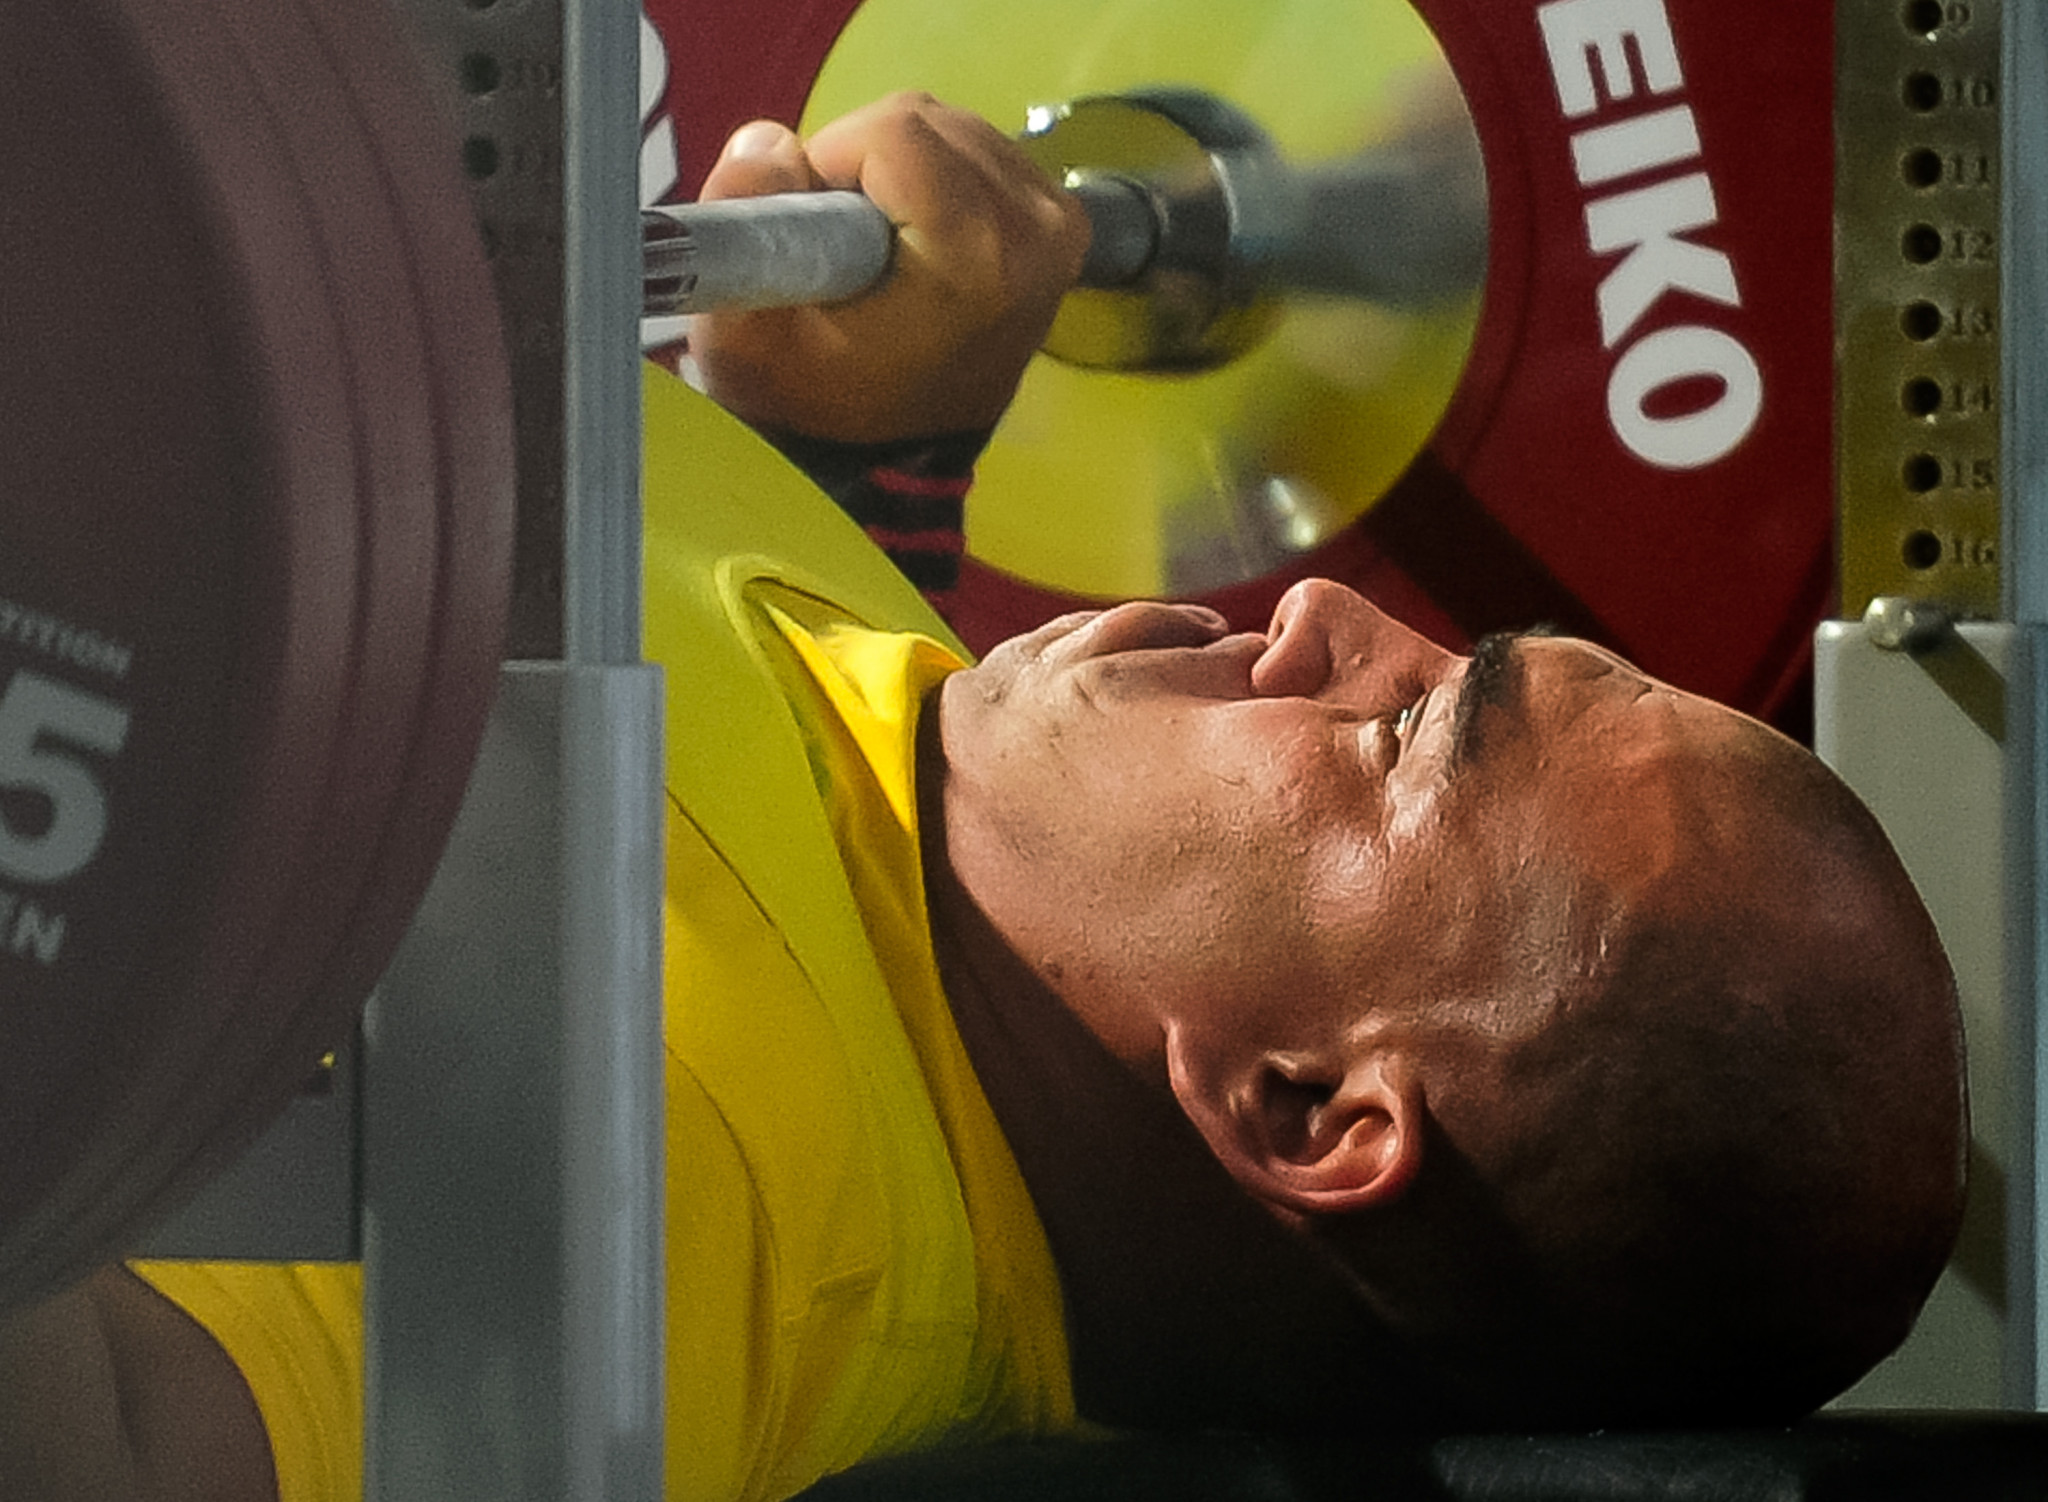 Colombia's Jhon Castaneda​ Velasquez has been shortlisted for World Para Powerlifting's Best Powerlifter of 2018 award after being named Best Americas Powerlifter ©Getty Images